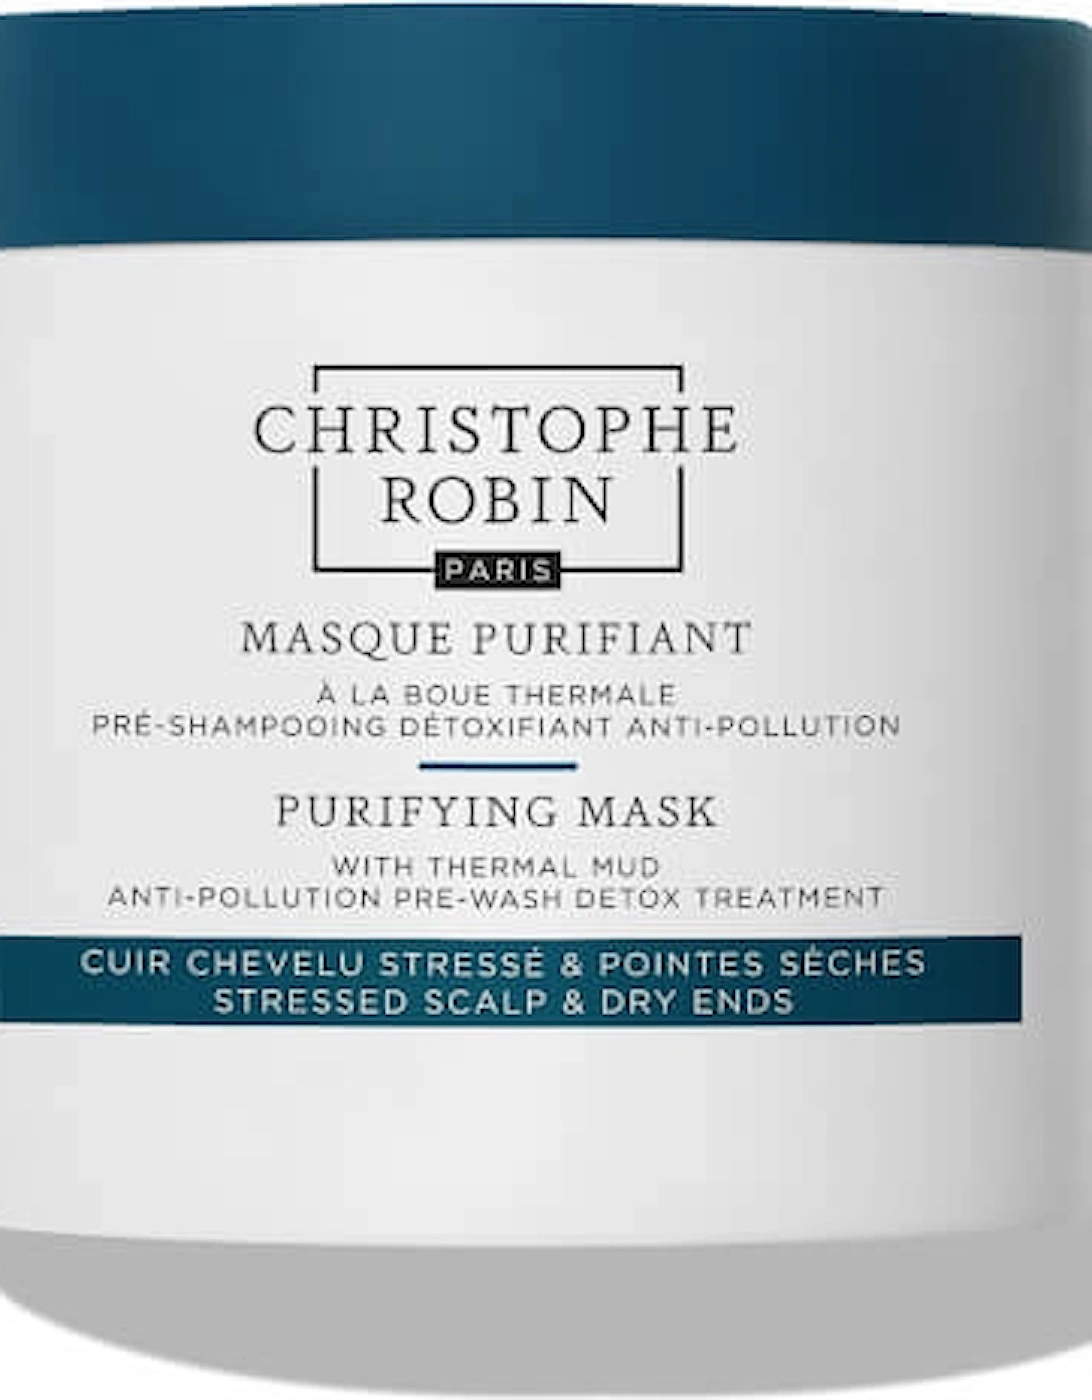 Purifying Mask with Thermal Mud 250ml - Christophe Robin, 2 of 1